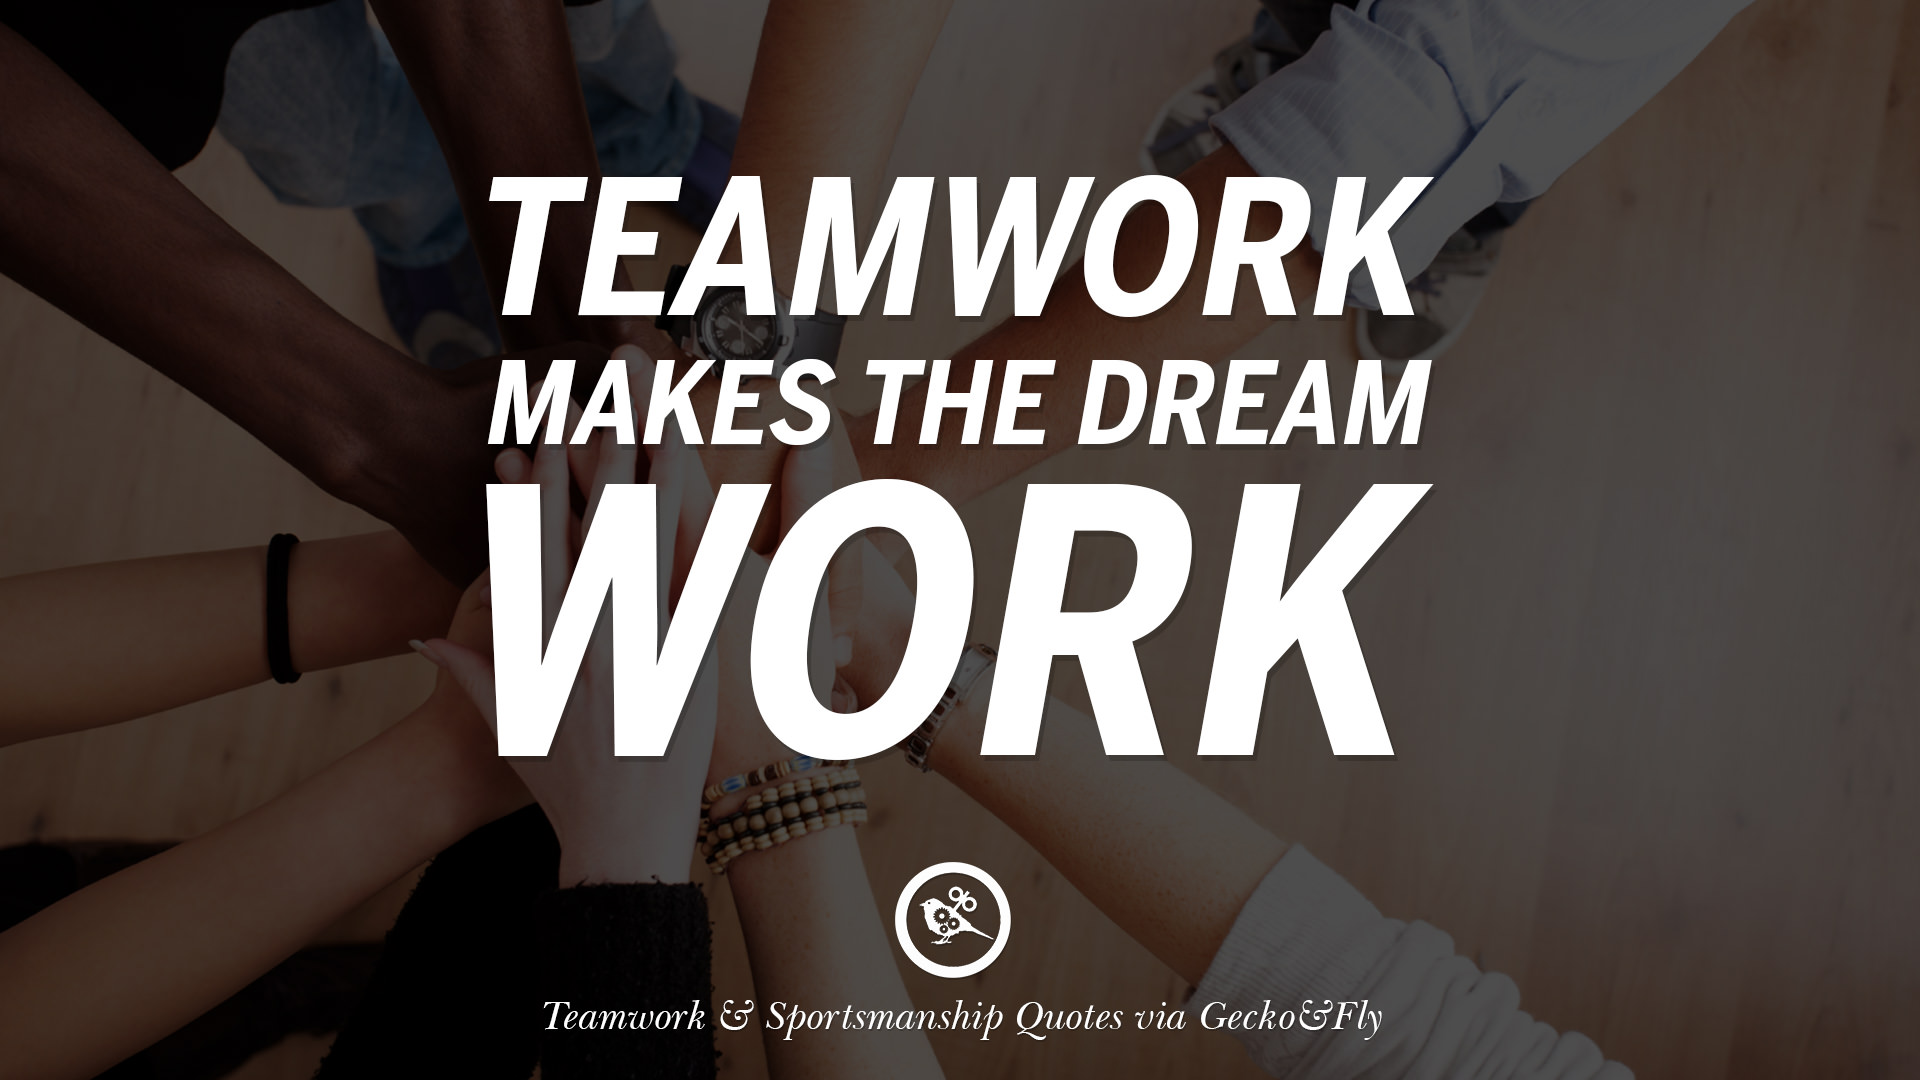 50 Inspirational Quotes About Teamwork And Sportsmanship